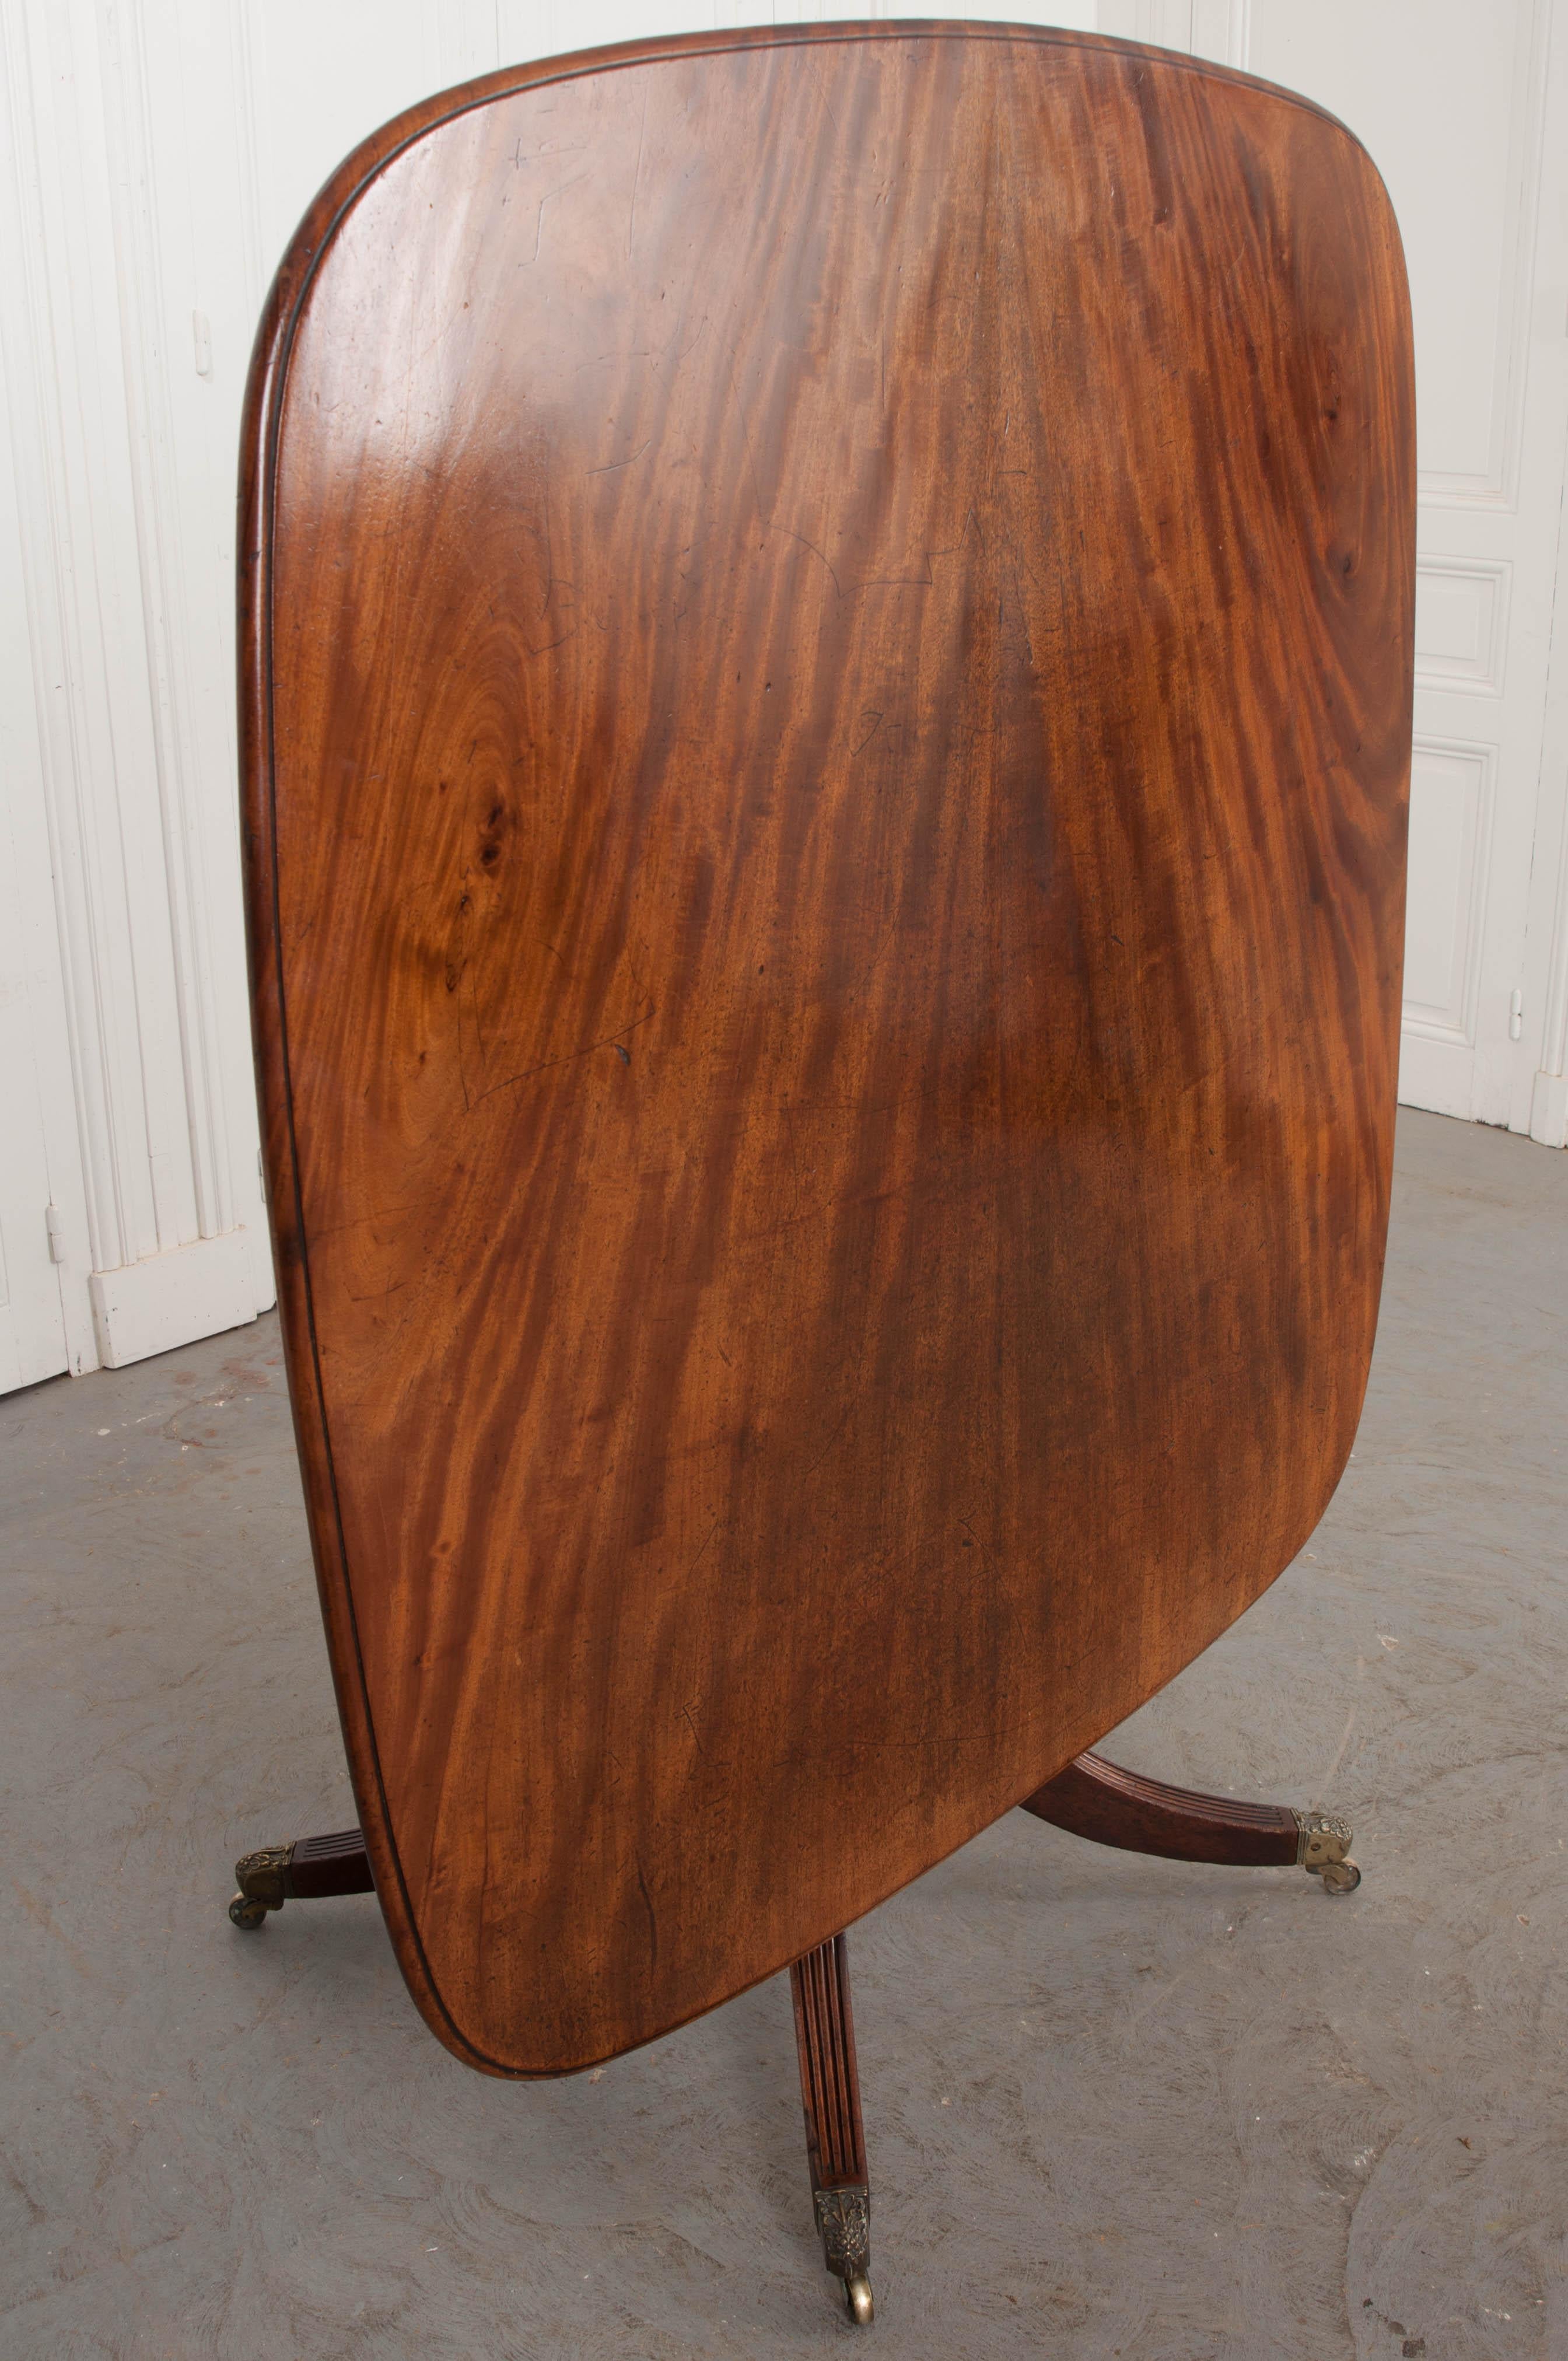 This fine English mahogany tilt-top center table is signed and dated “T.O. Beeman, 1849,” on the underside. The surface, of almost square section, has gorgeous book-matched mahogany veneer, rounded corners and tilts for storage when not in use. The